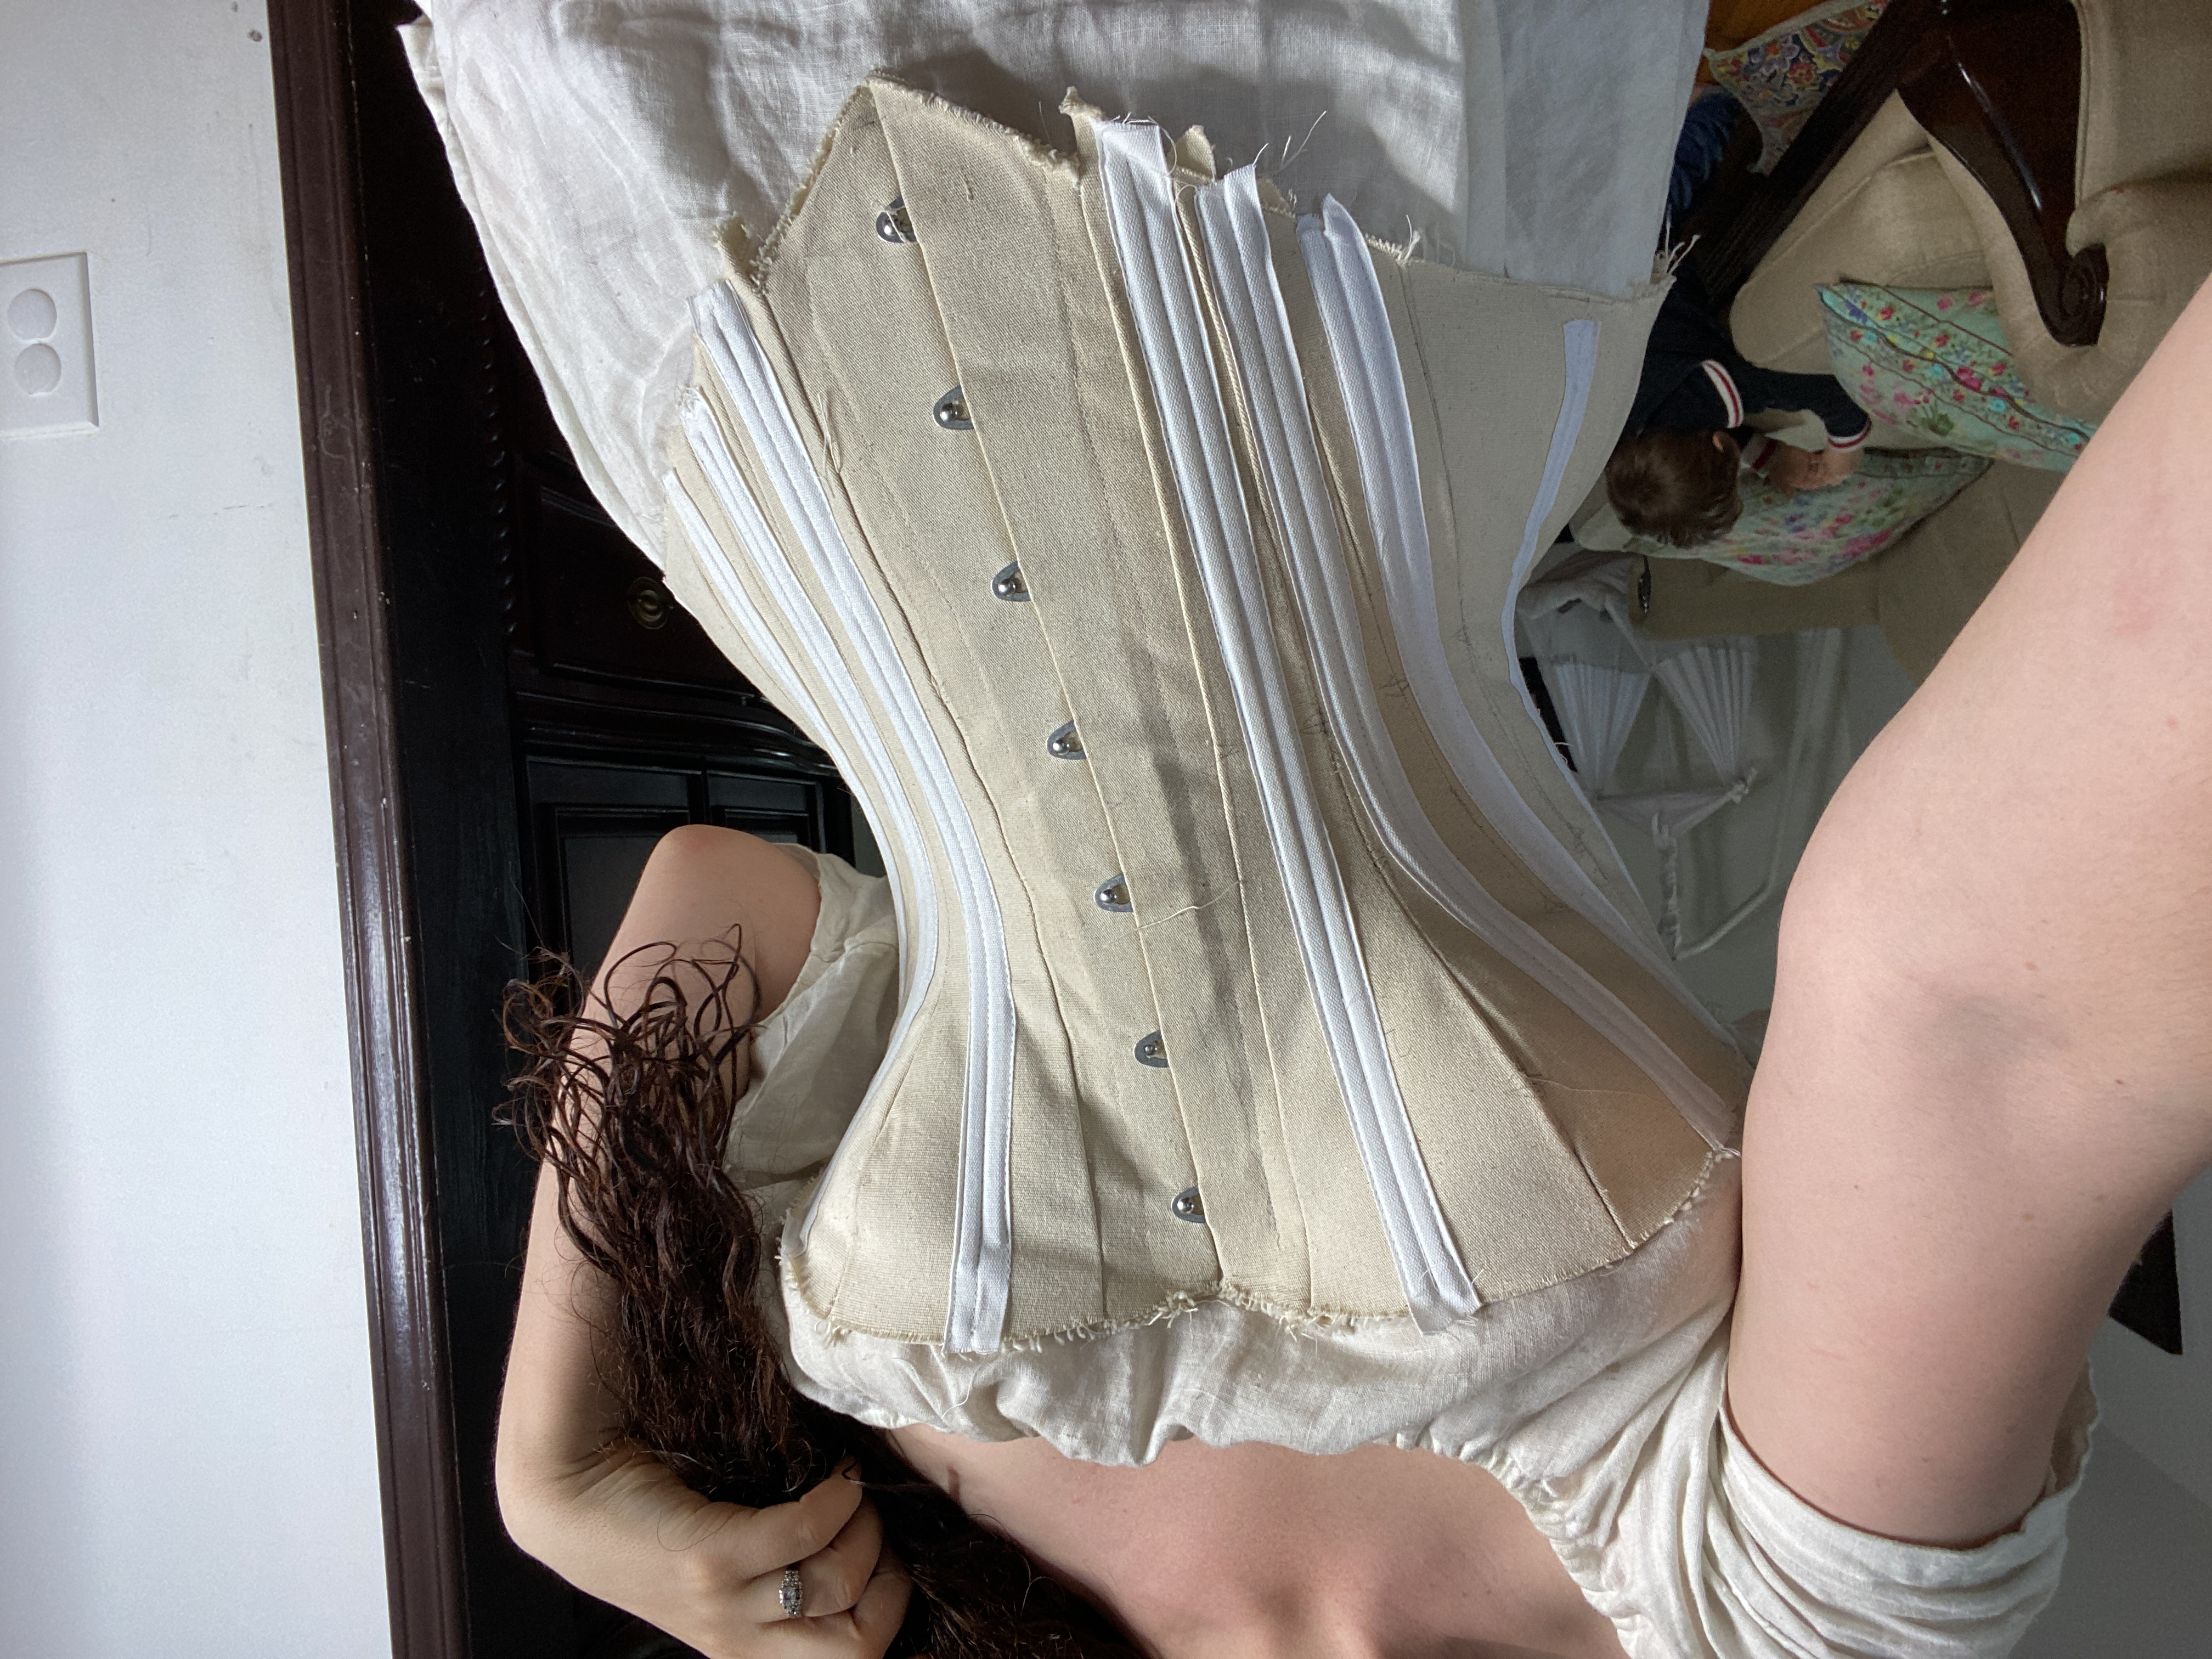 Custom-made Late Victorian Tightlacing Corset. Prototype Corset Step  Included, Made to Your Body Measurements. 